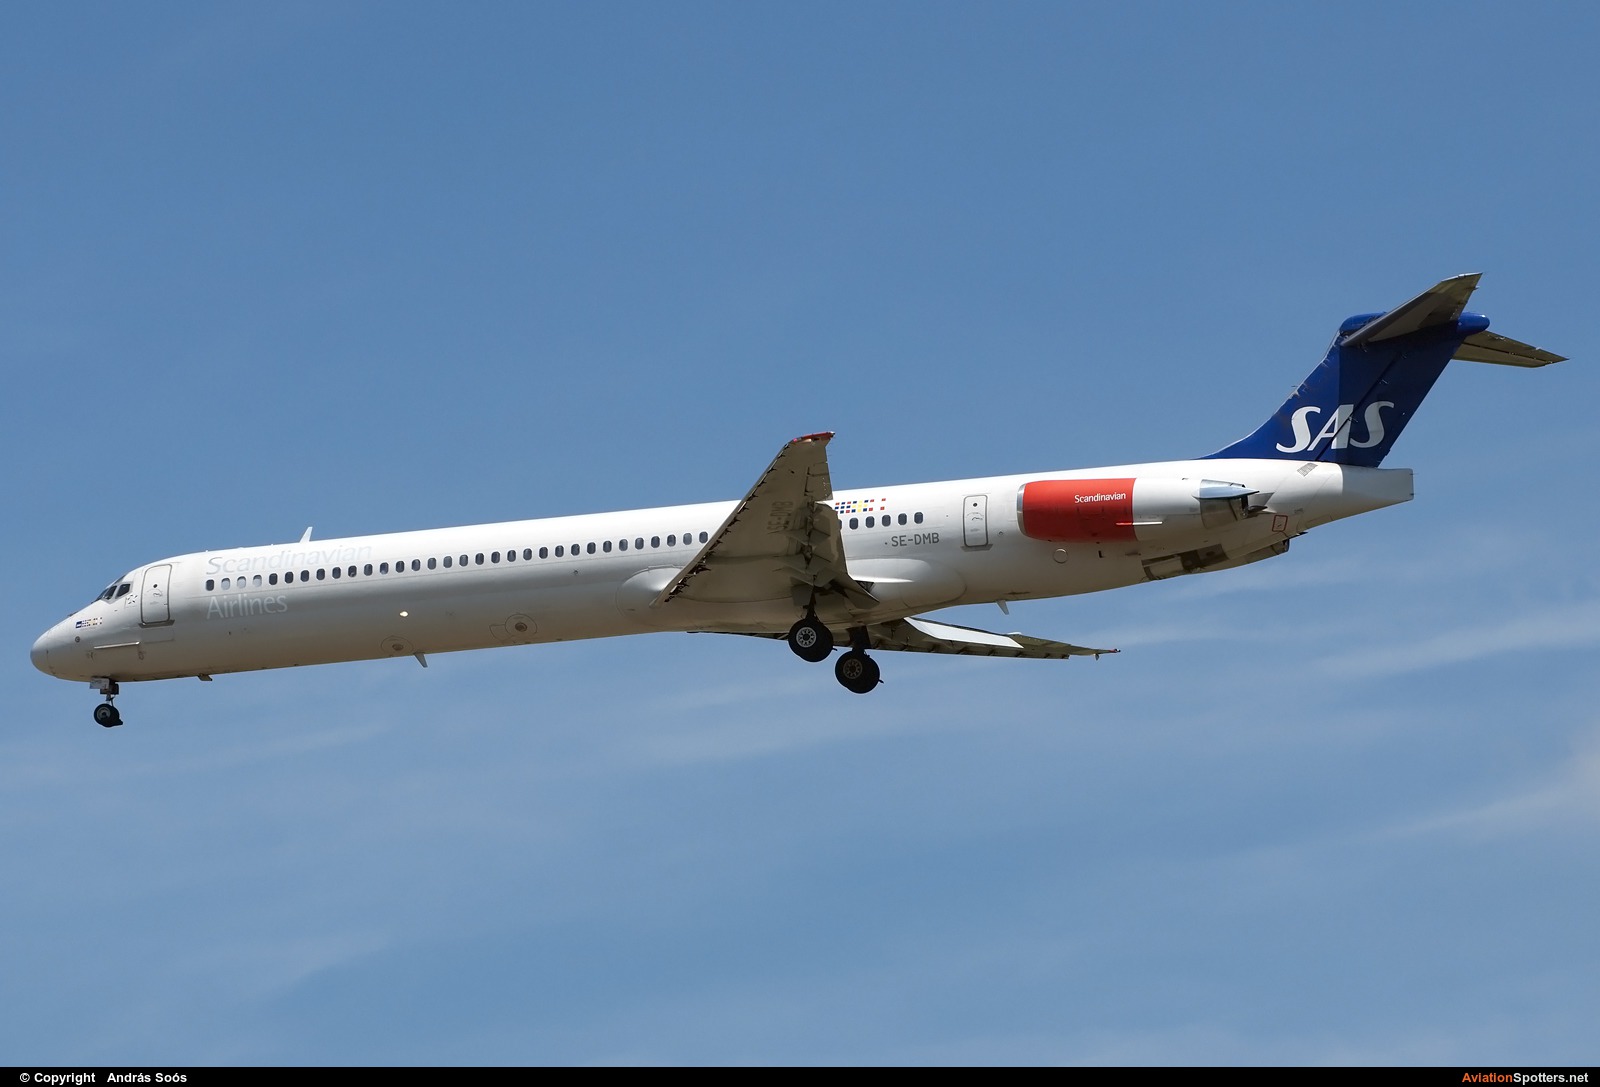 SAS - Scandinavian Airlines  -  MD-81  (SE-DMB) By András Soós (sas1965)